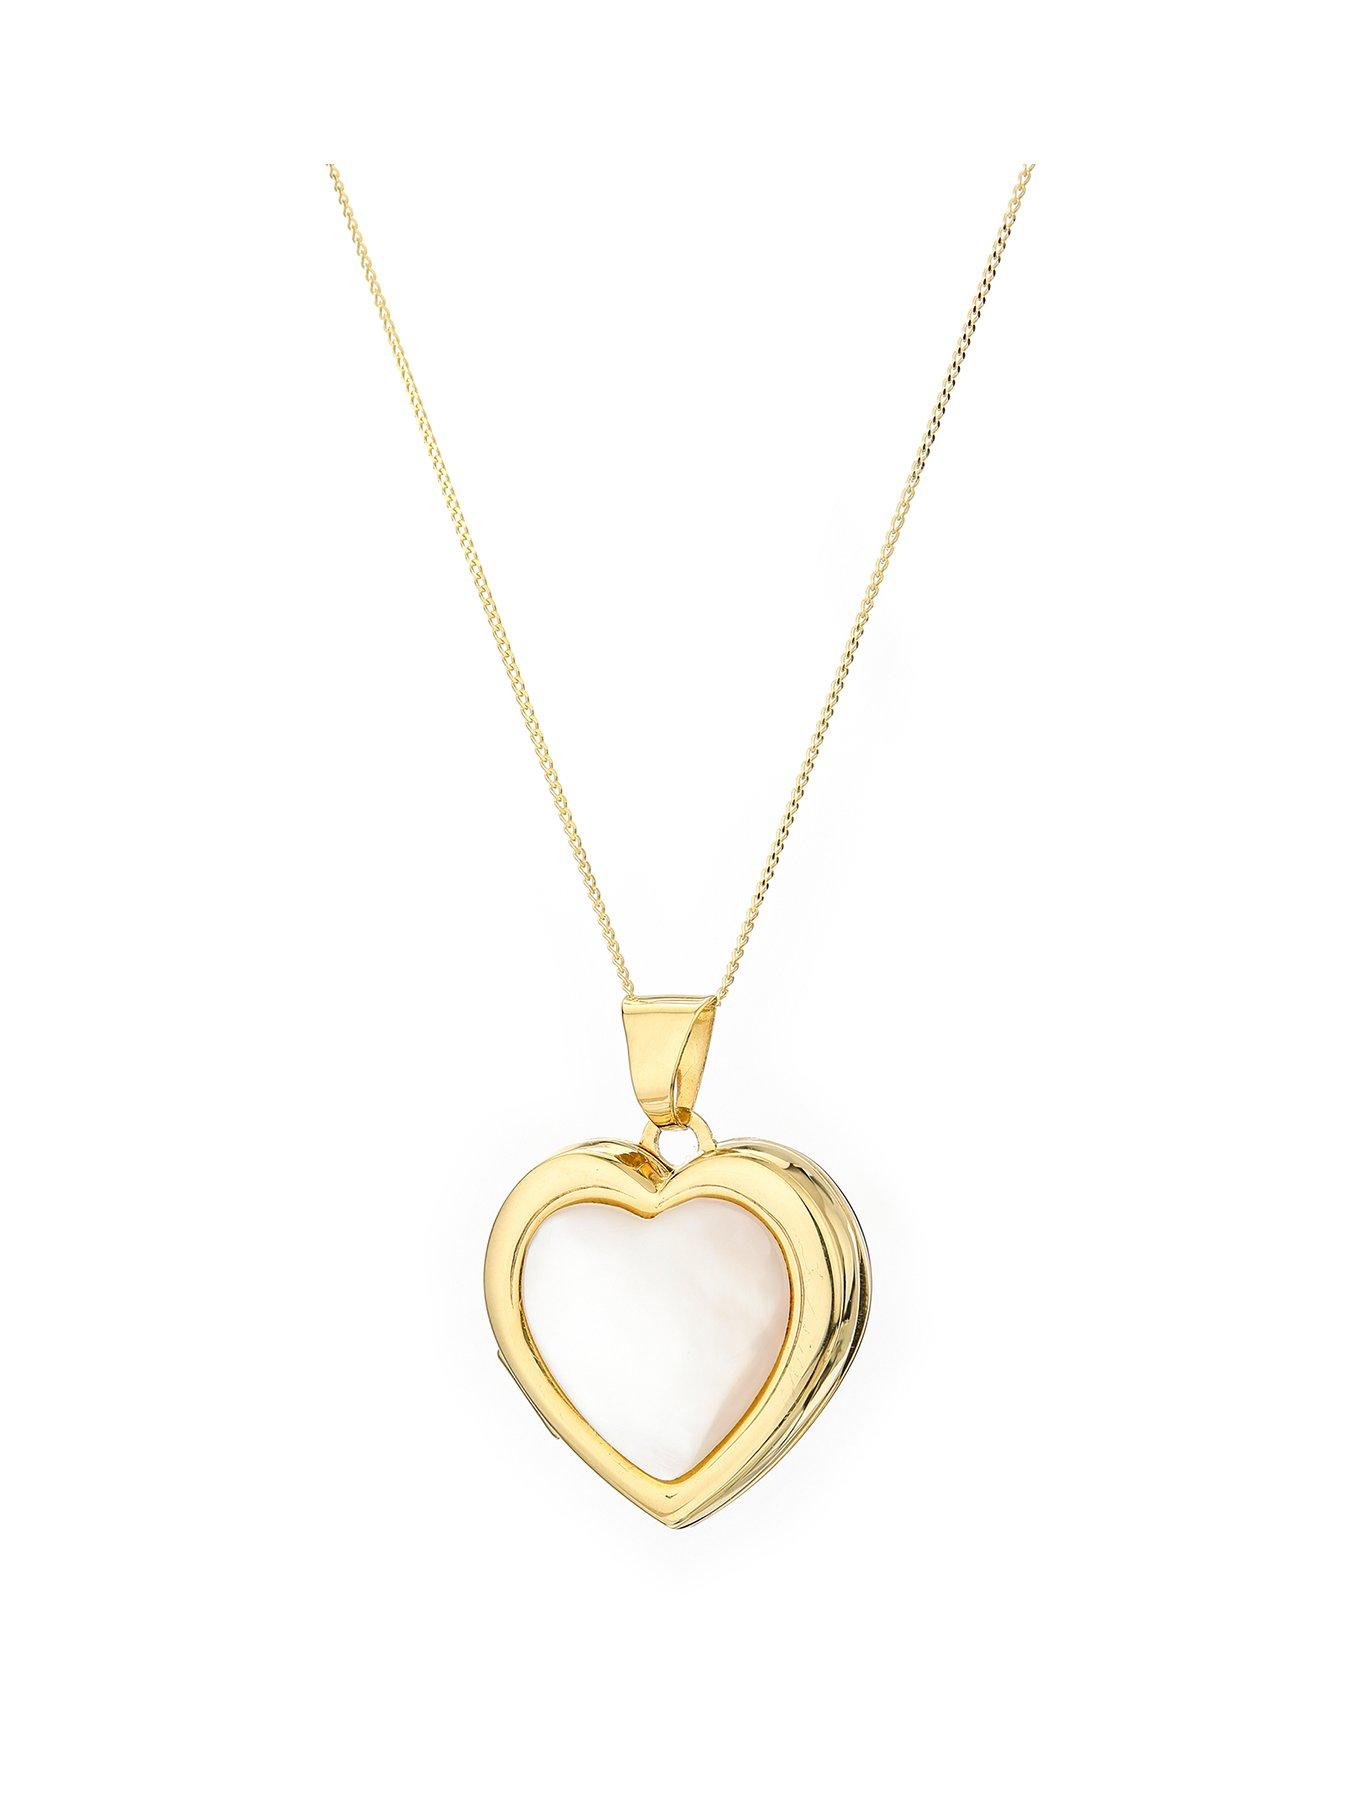 9ct Gold Pearl Pendant and Chain Made in UK Gift Boxed Necklace Birthday Gift 